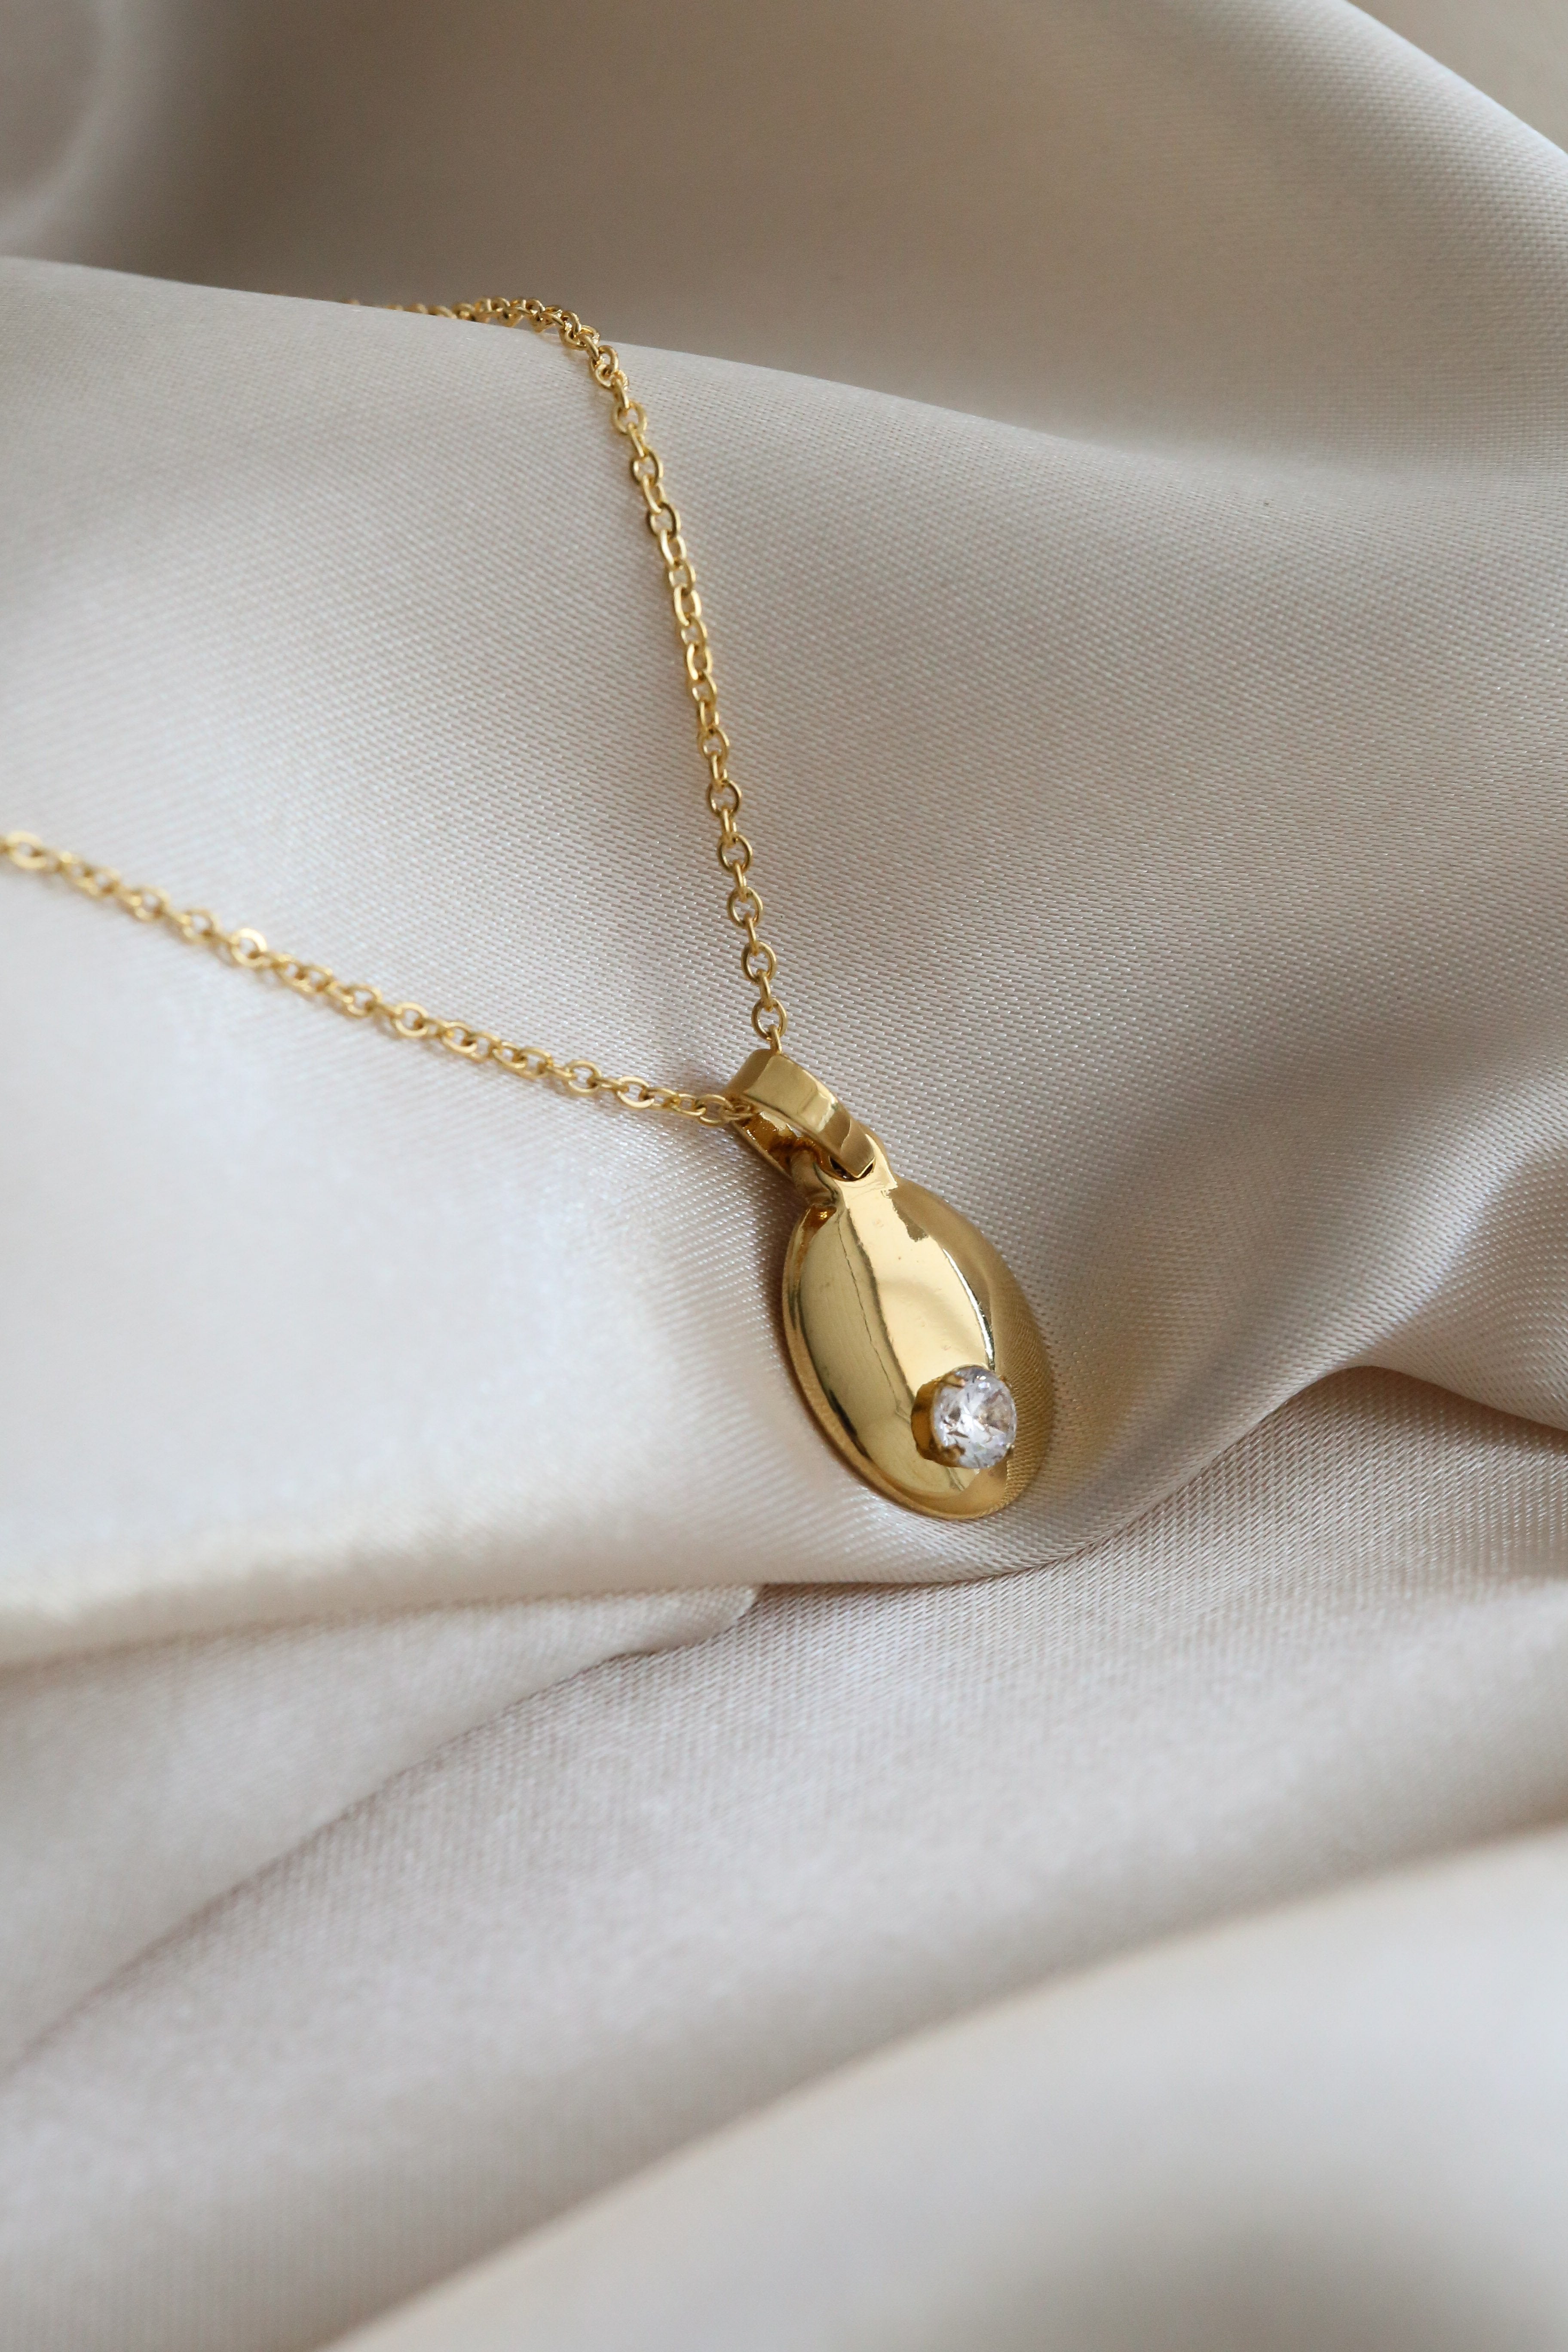 Adelaide Necklace - Boutique Minimaliste has waterproof, durable, elegant and vintage inspired jewelry